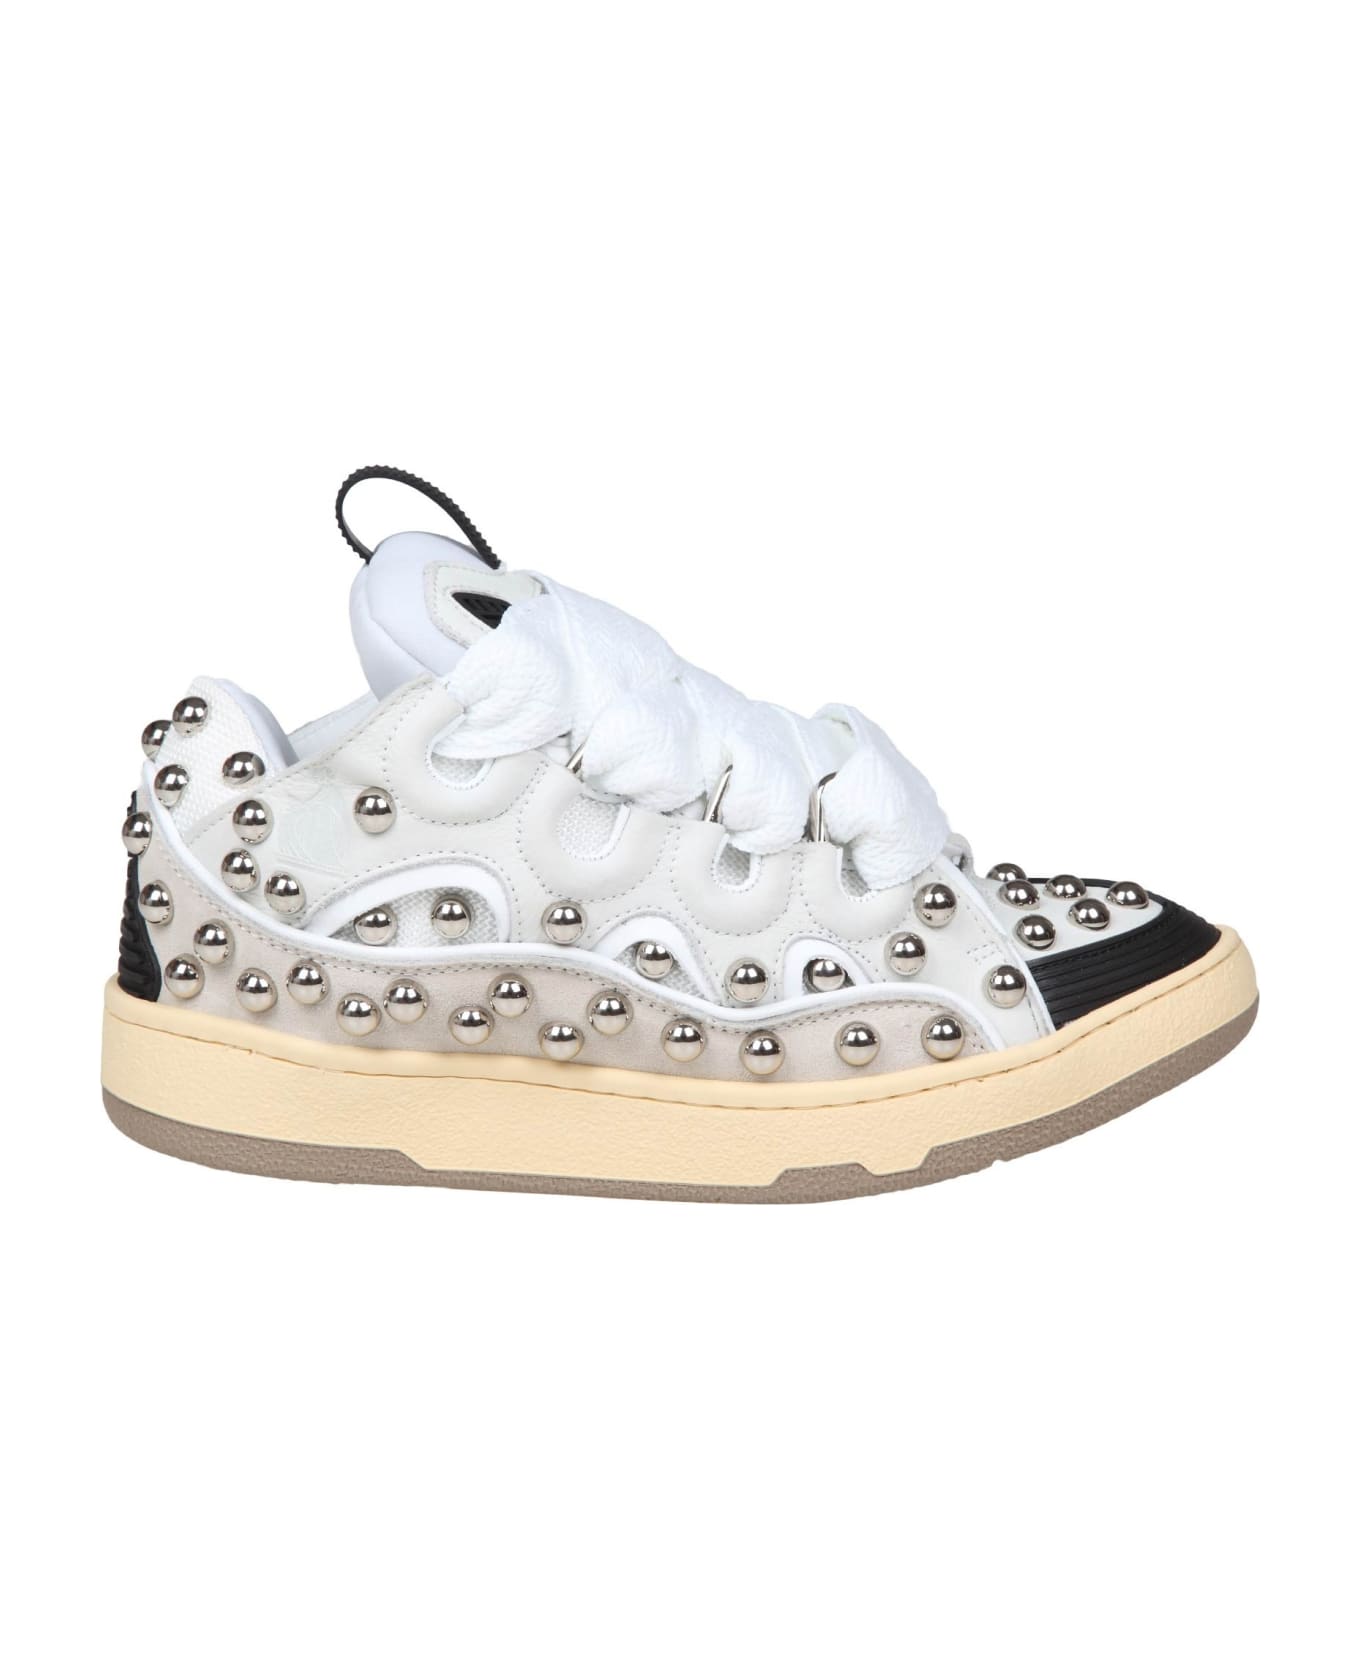 Lanvin Curb Sneakers In Black And White Leather With Applied Studs - White スニーカー